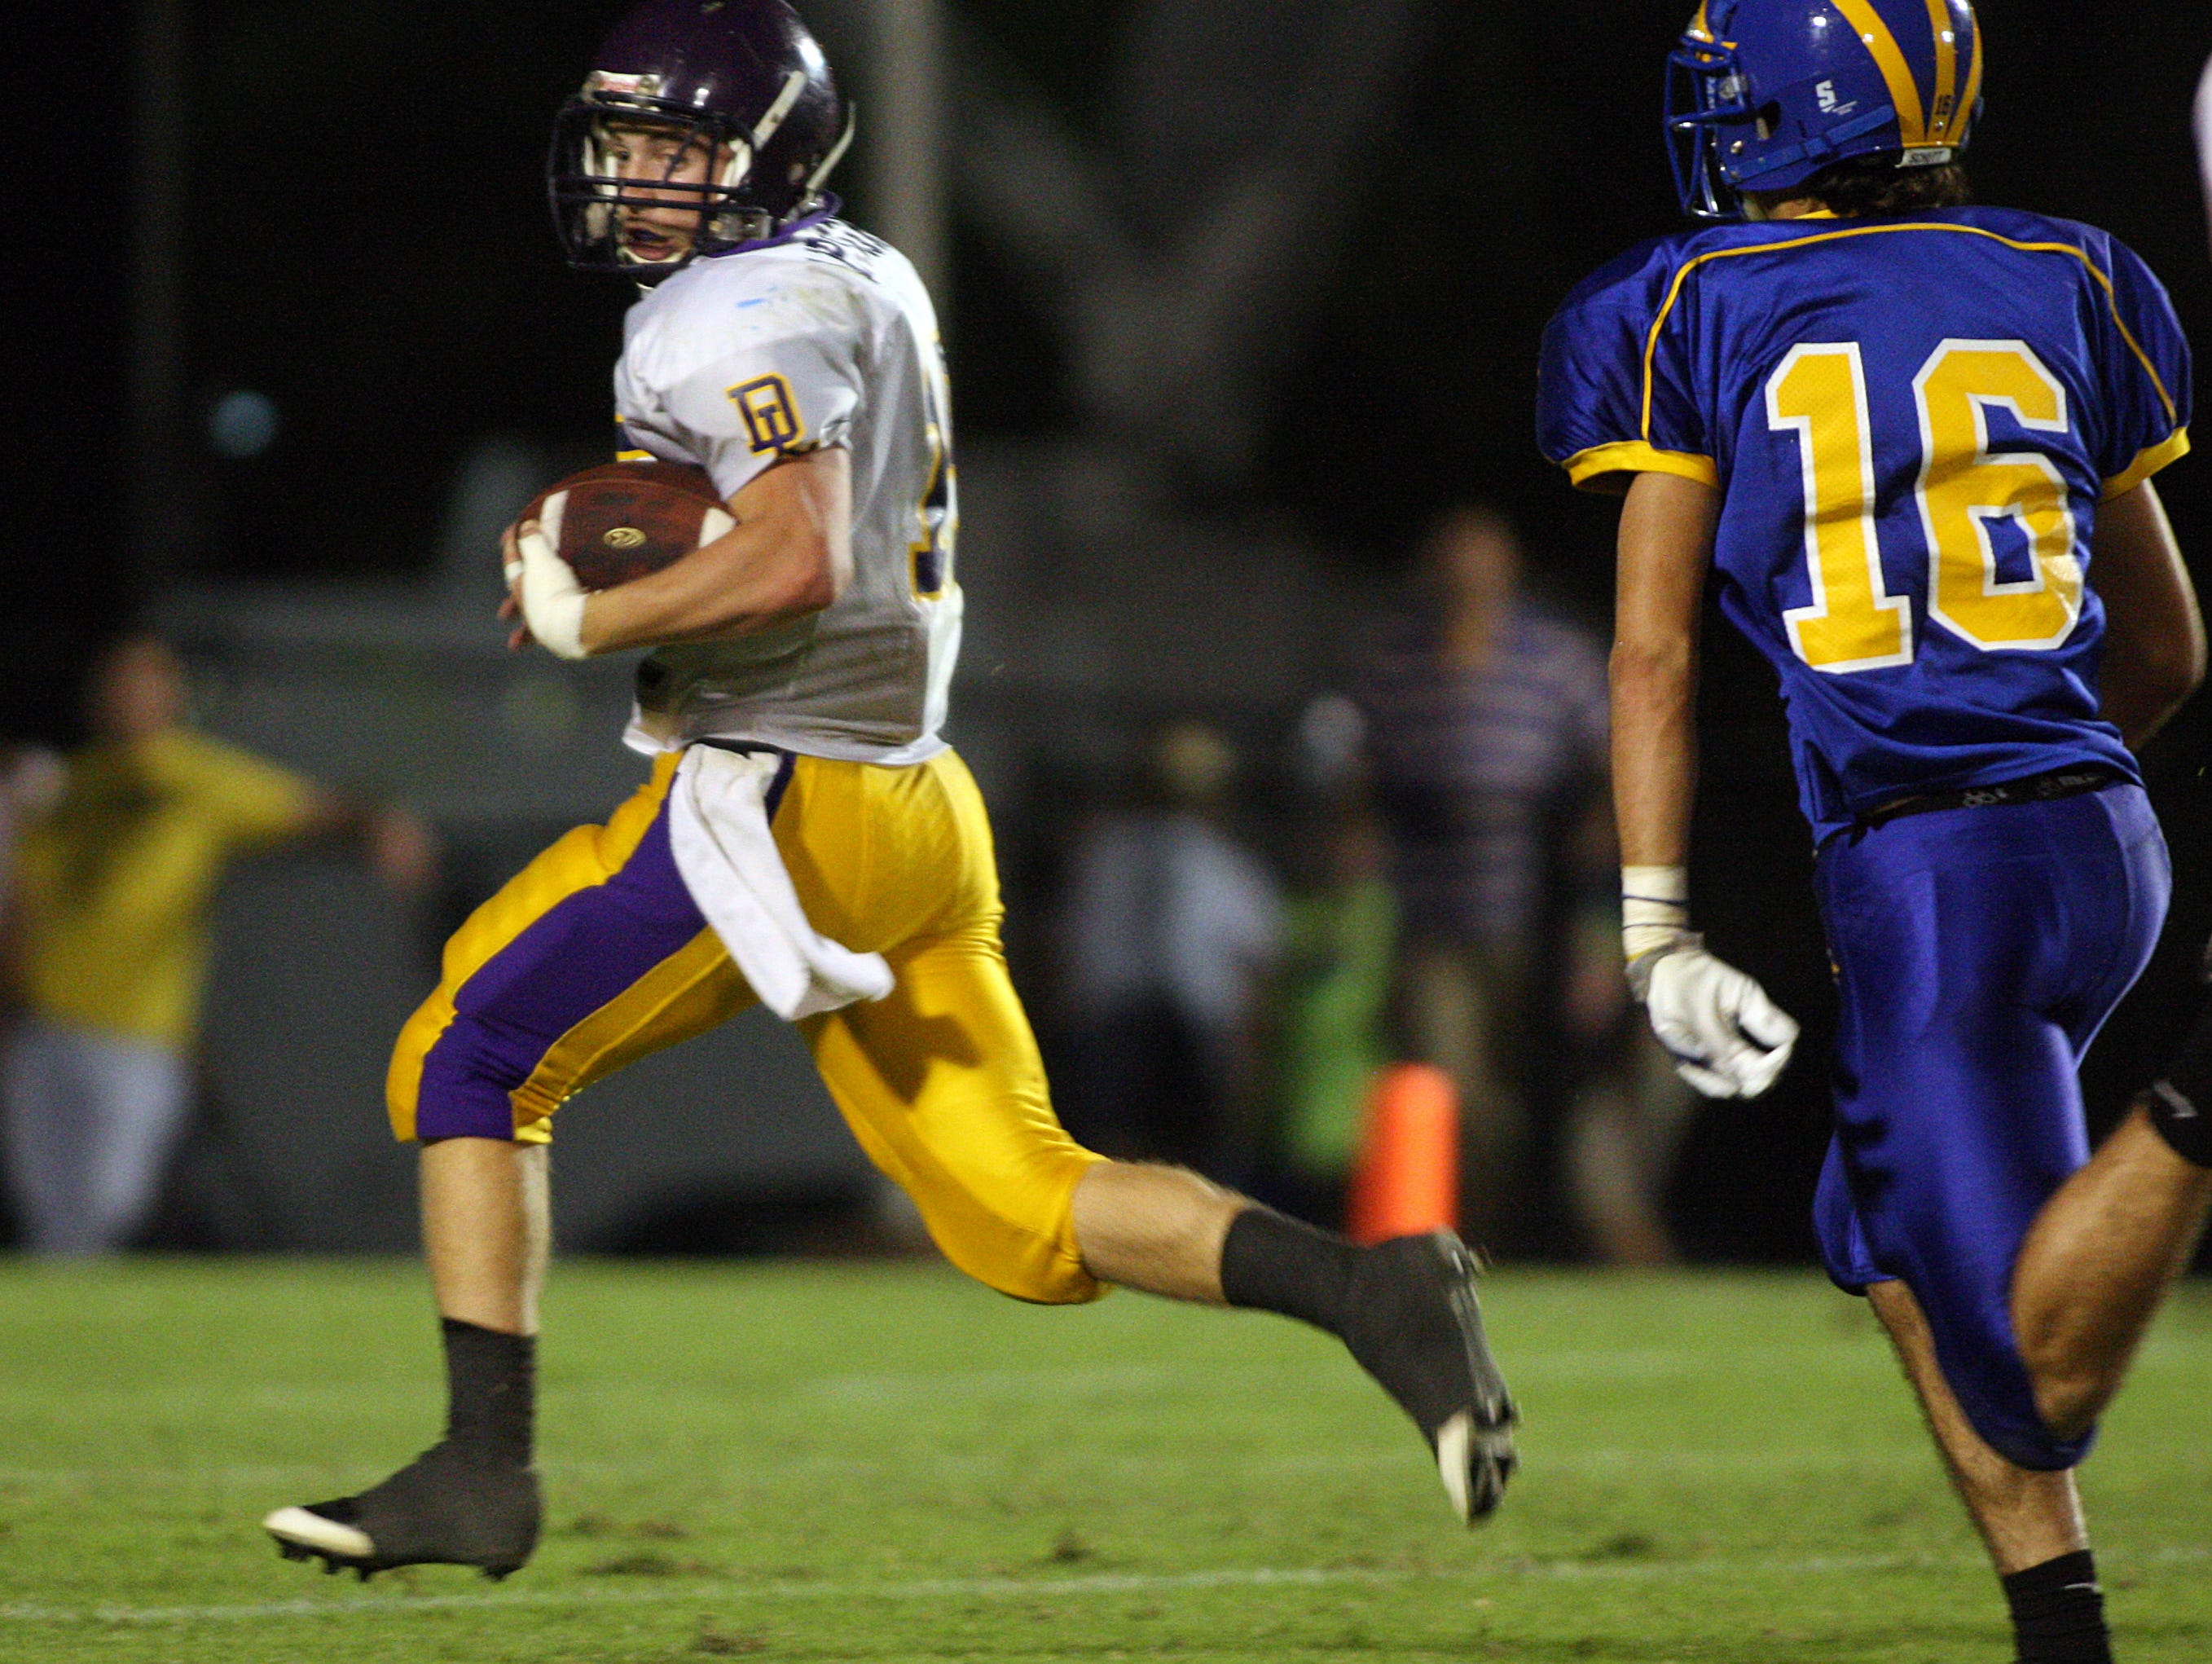 Lipscomb's Michael Mascol looks behind him while running in a touchdown against Goodpasture during a 2010 contest.